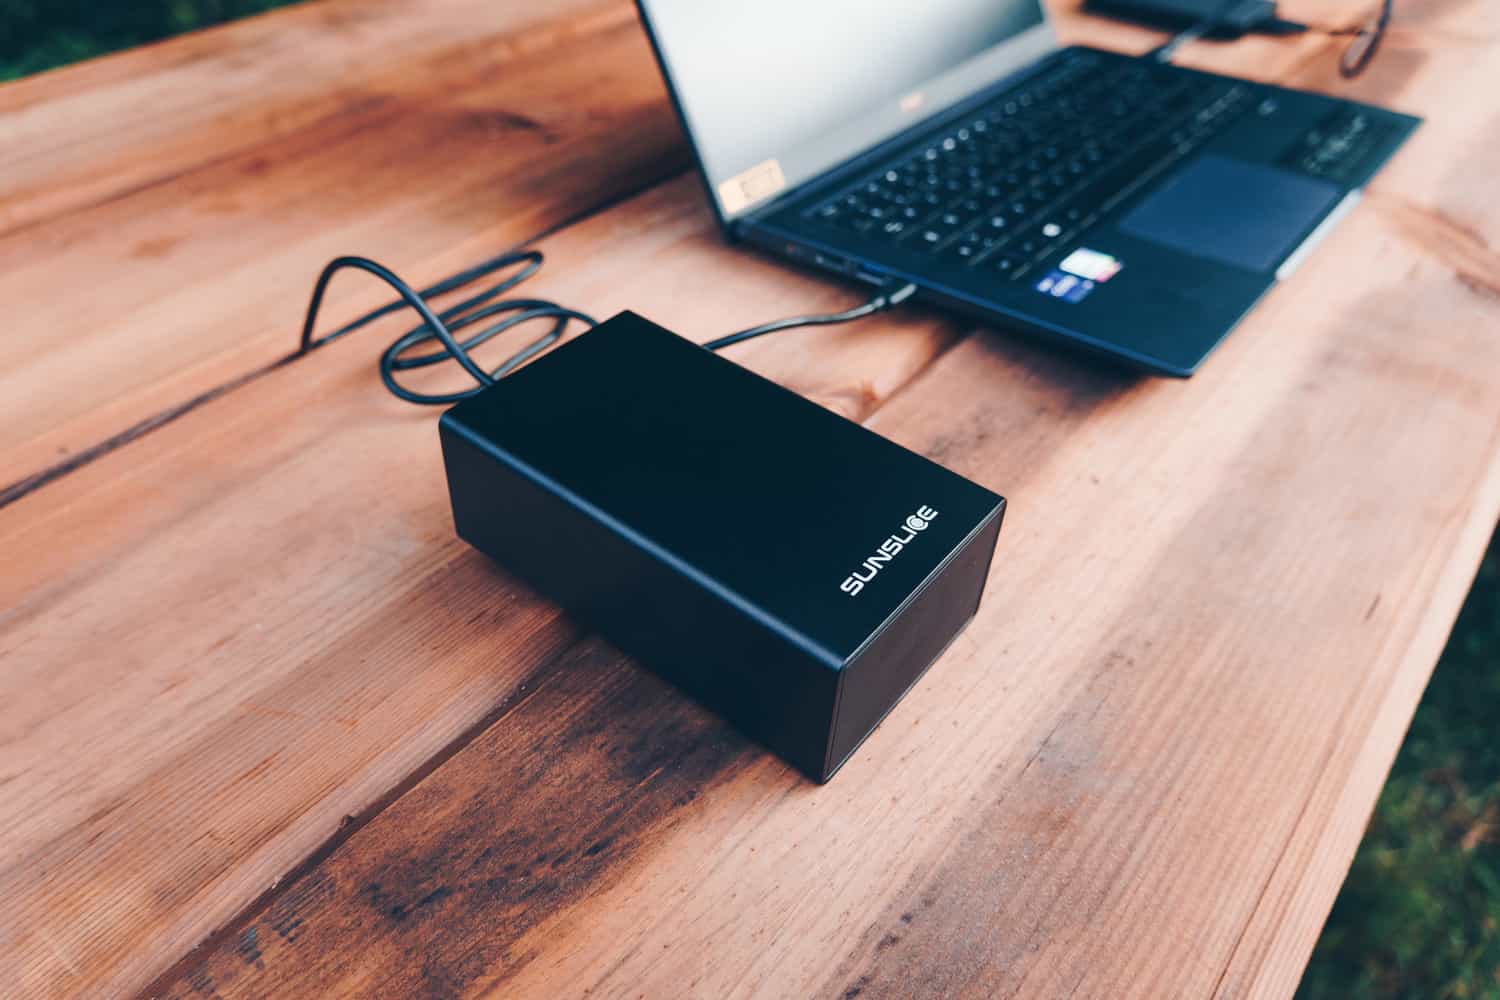 backup battery for laptop loading a computer on a table